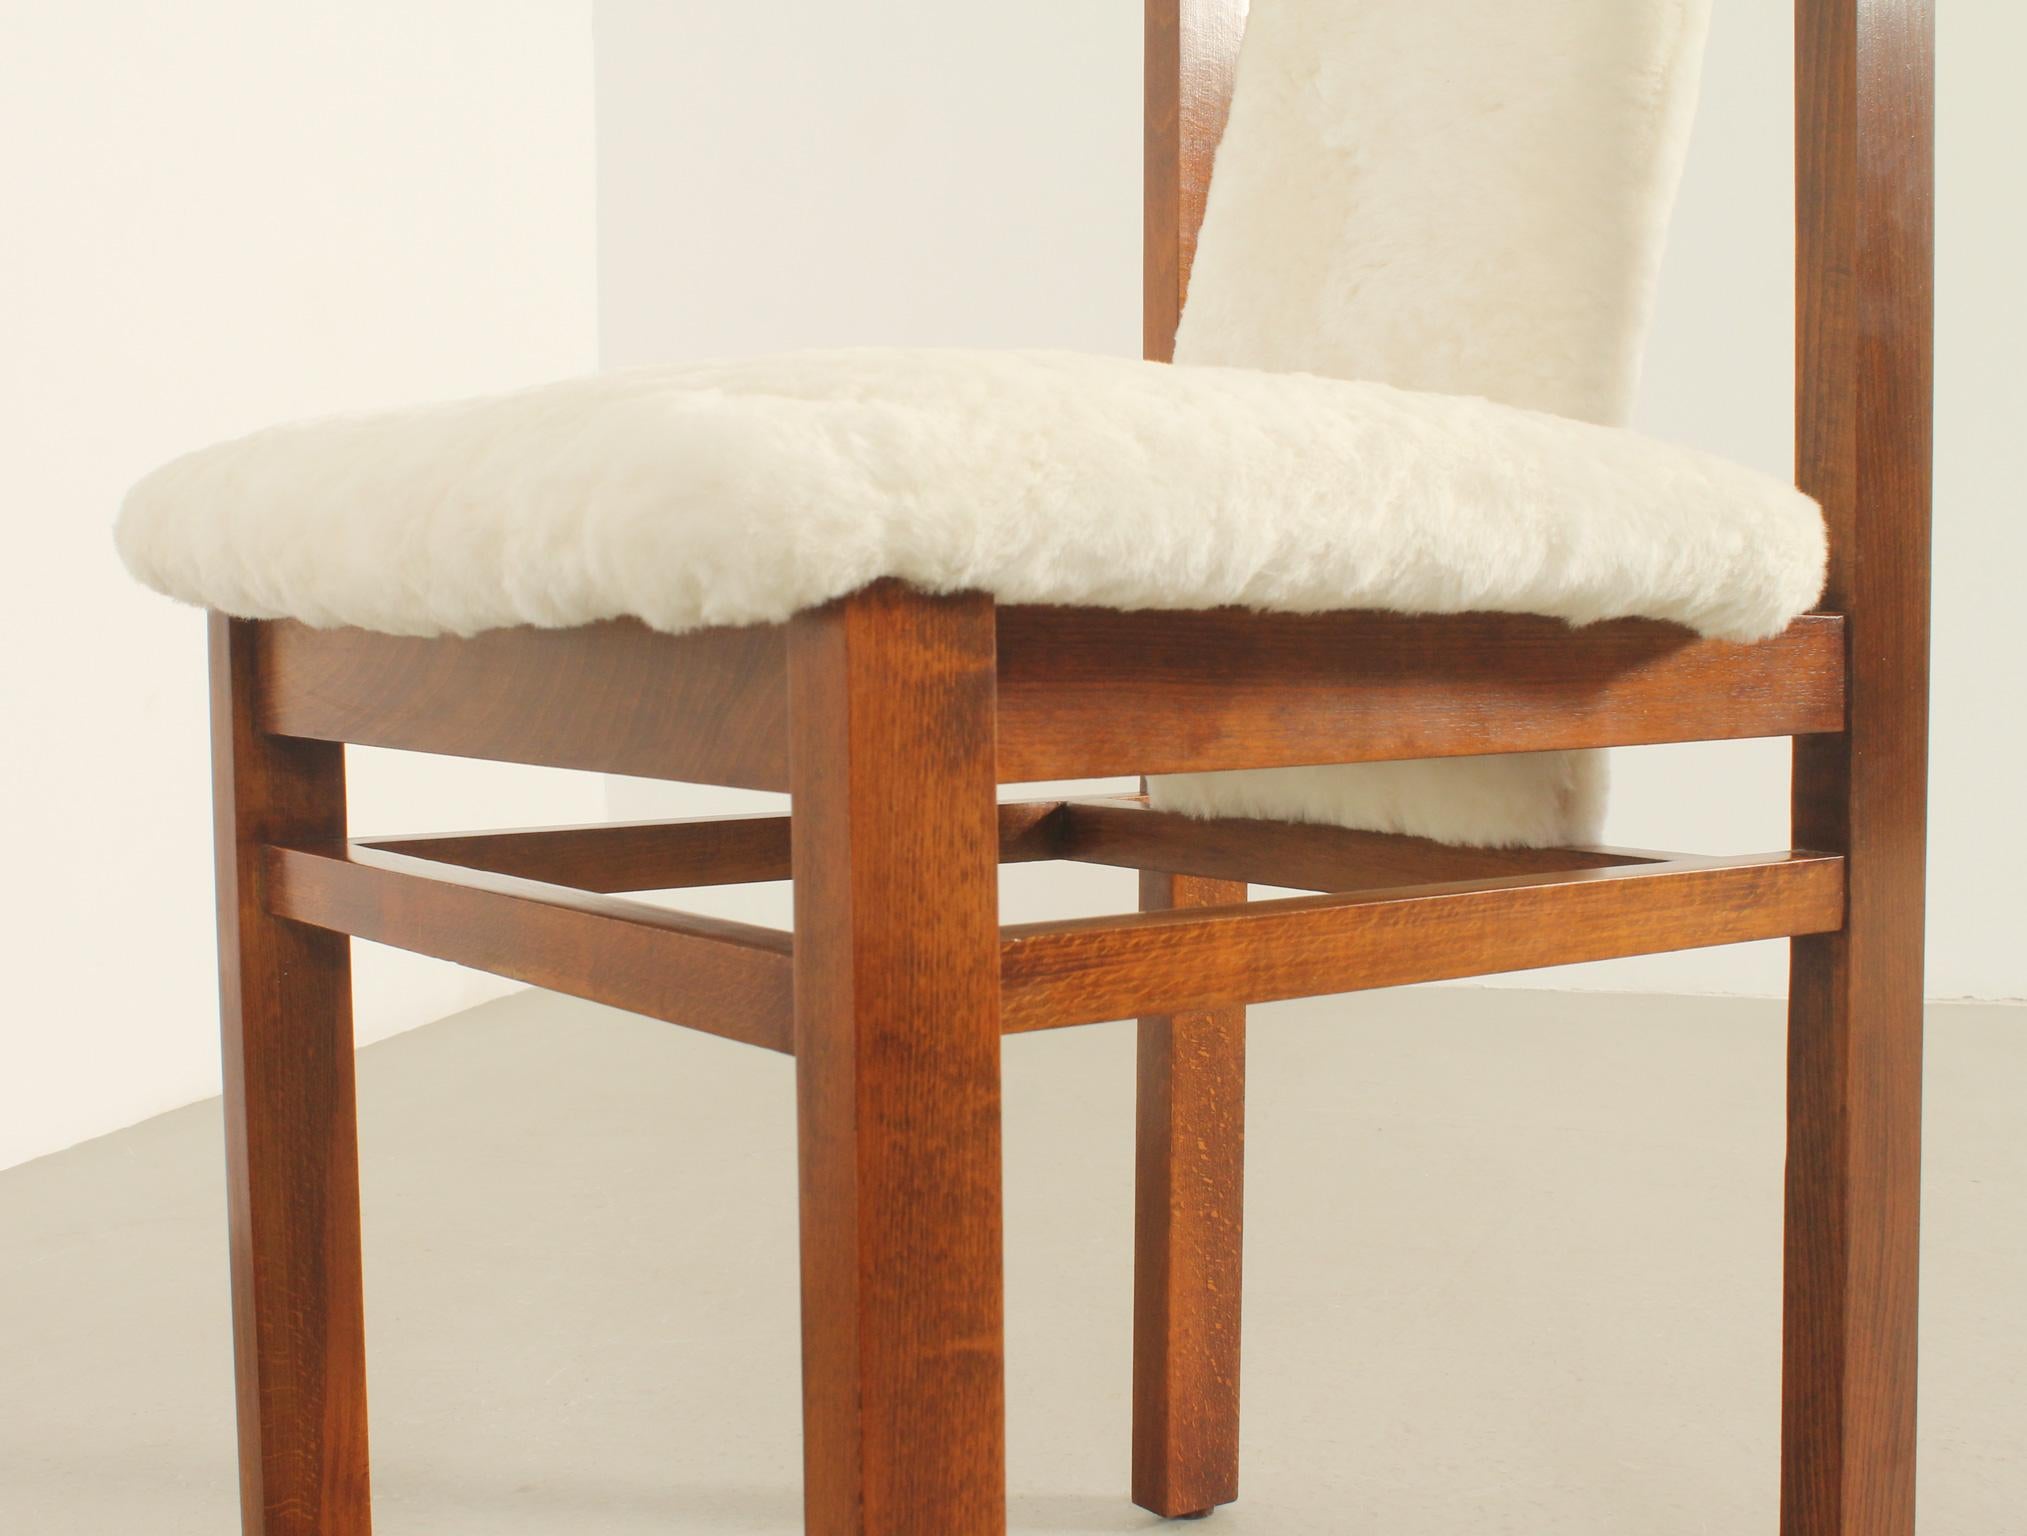 Four Dining Chairs by Jordi Vilanova in Oak Wood and Sheepskin, Spain, 1960's For Sale 5